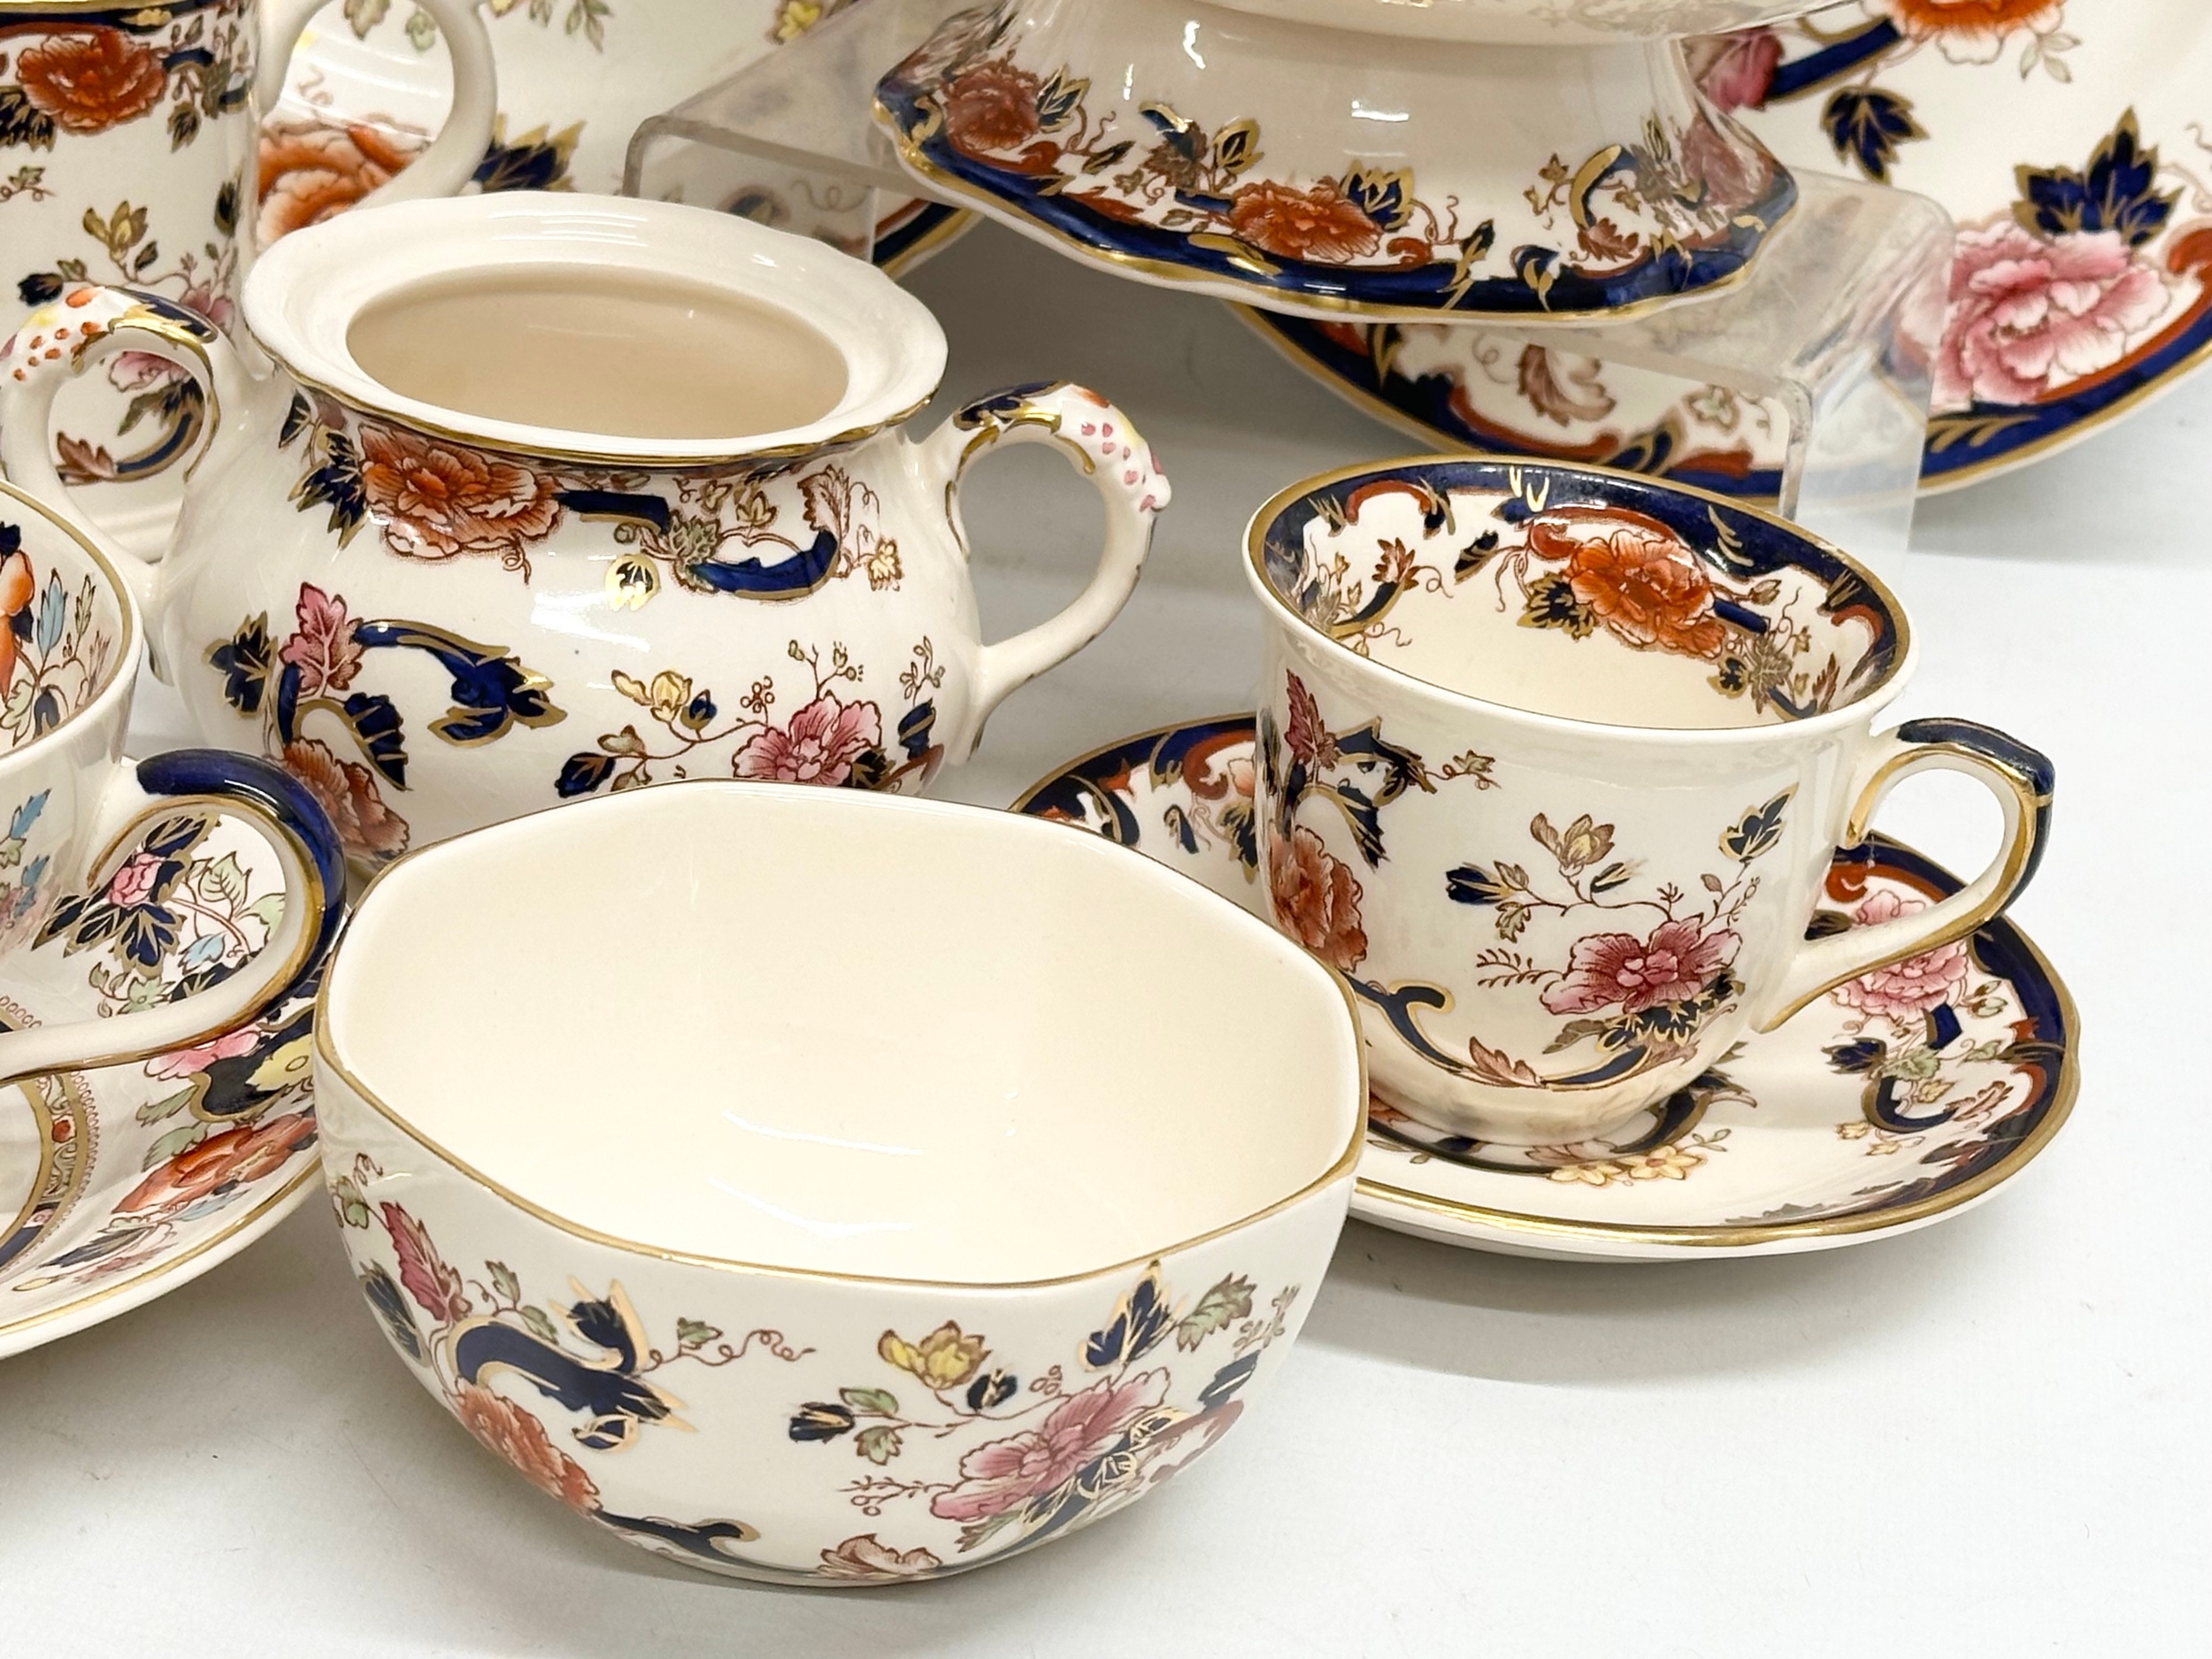 A quantity of Mason’s ‘Mandalay’ dinner and tea ware. 3 dinner plates. 2 large tea cups with - Image 3 of 6